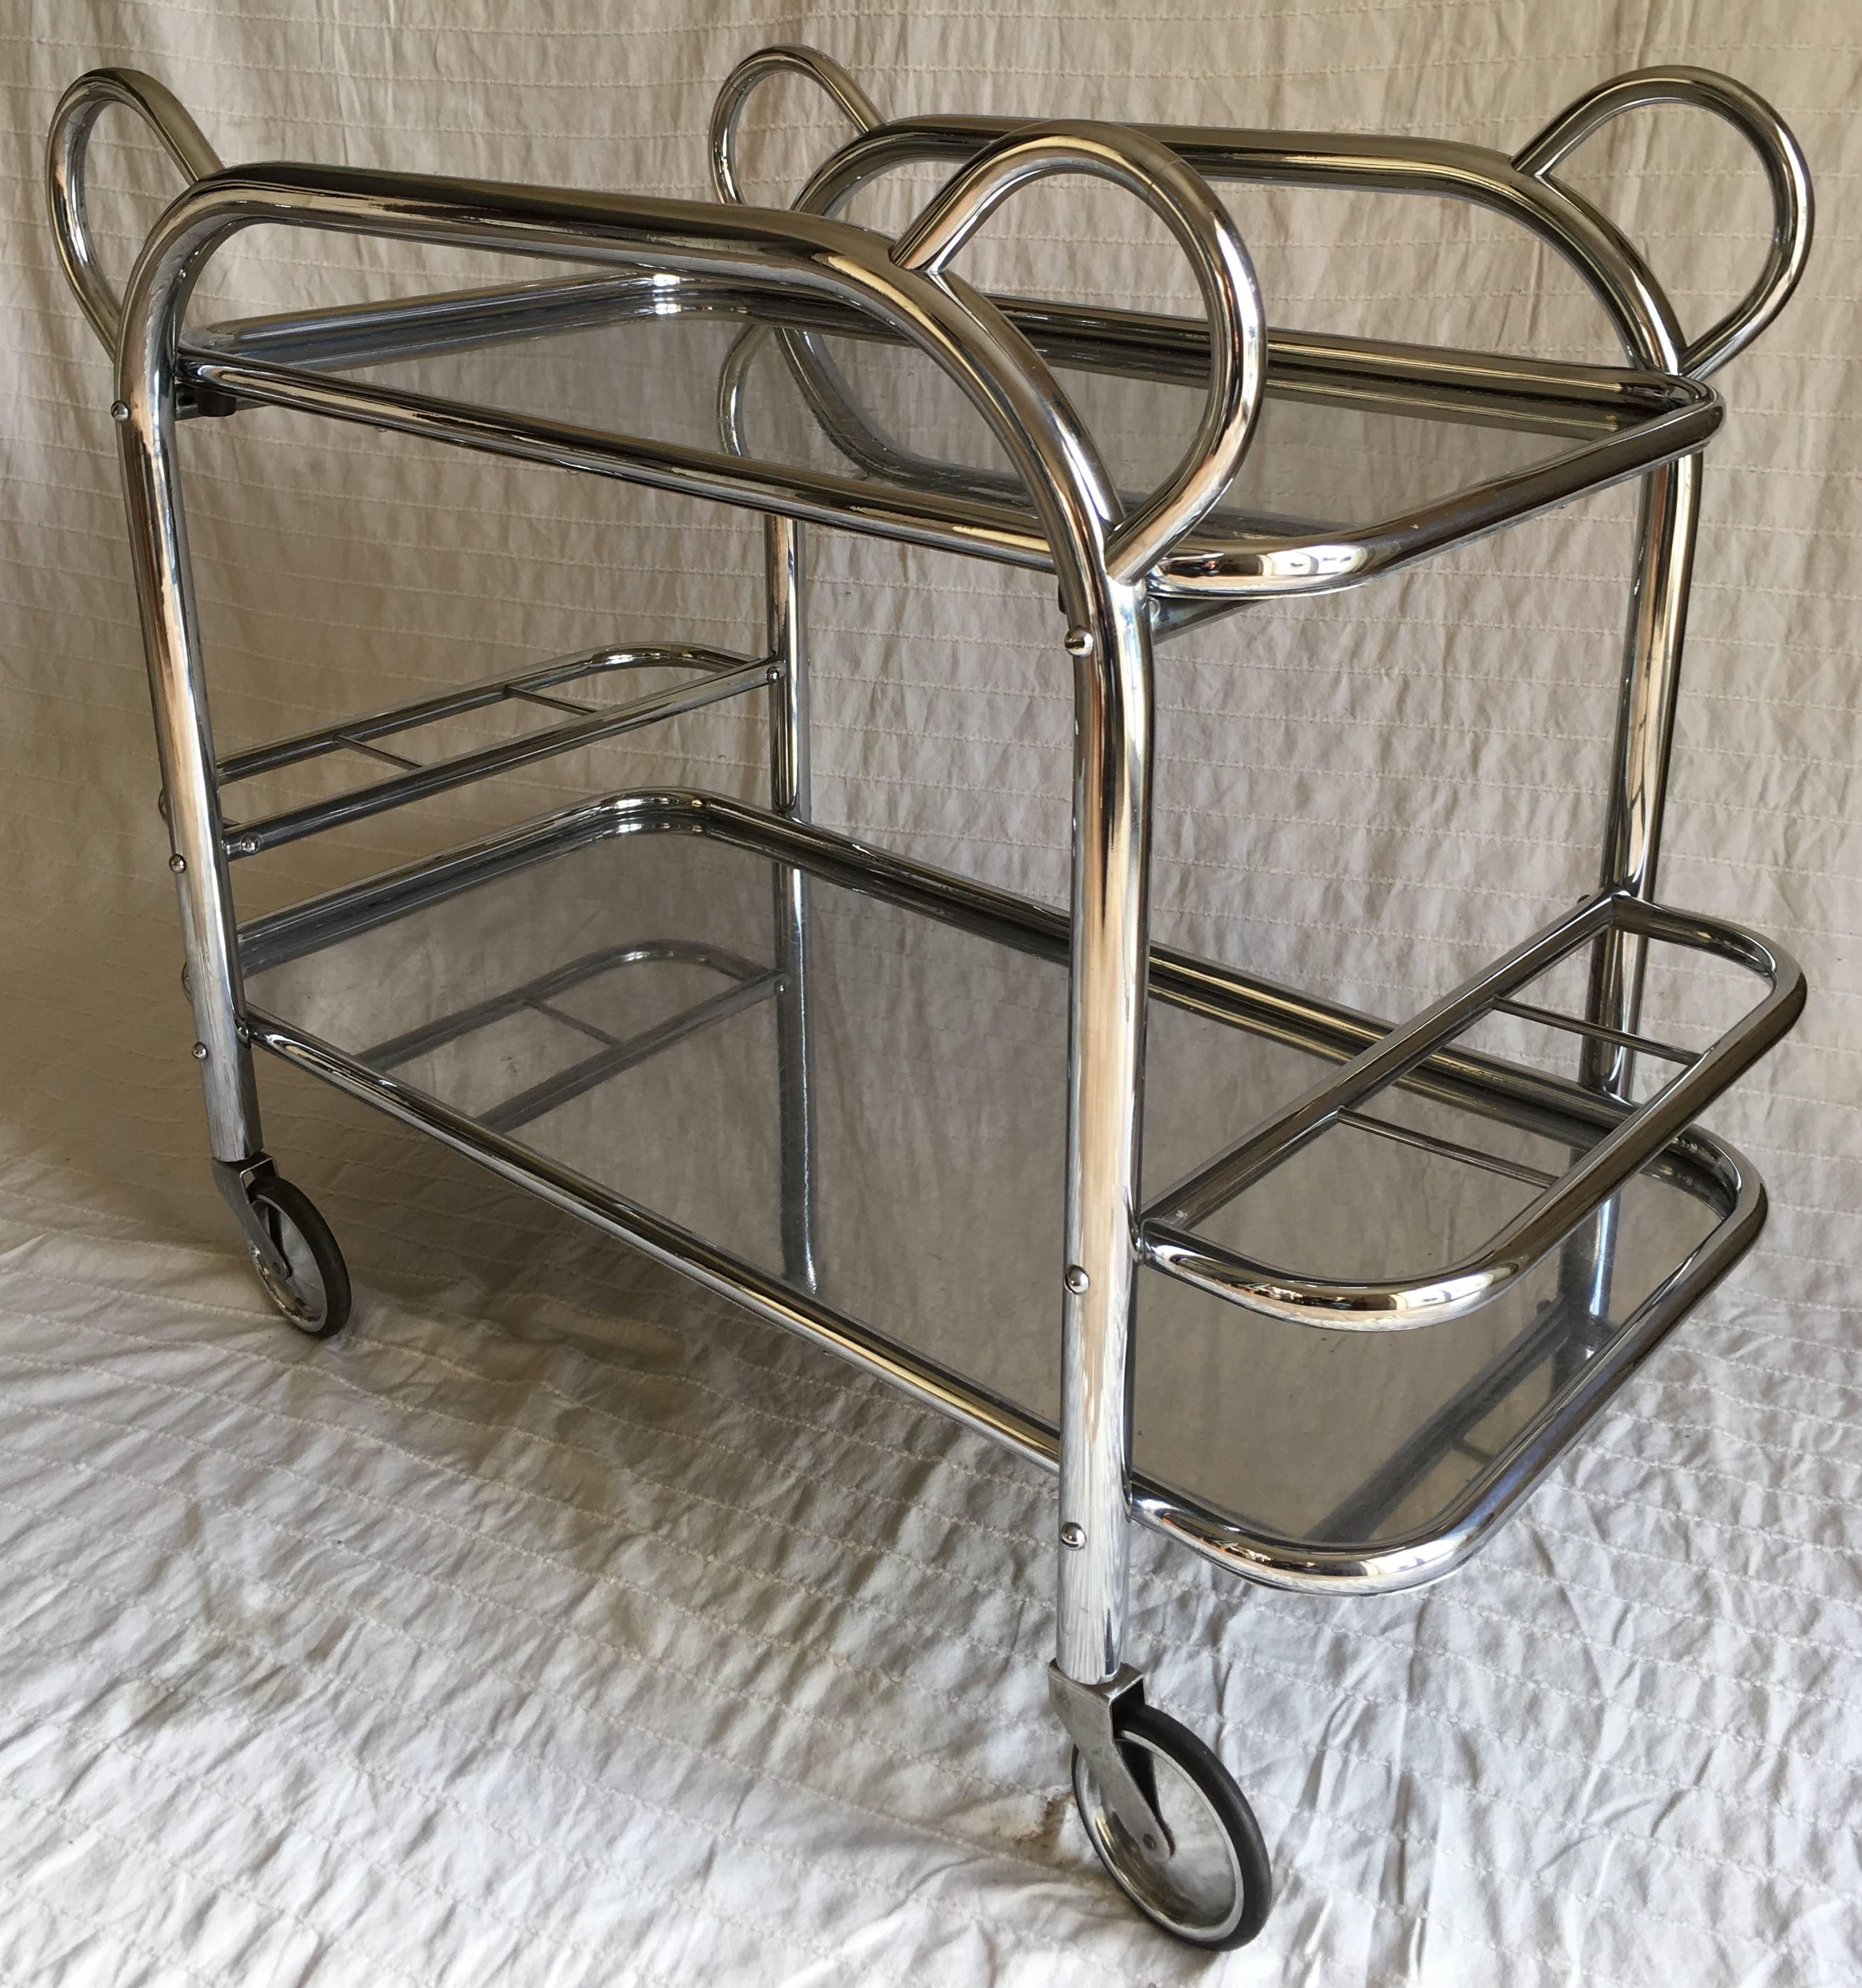 Elegant model of bar cart with a large removal tray very convenient.
Beautiful design and high quality chrome-plated tubular structure.
This rare model is often attributed to Robert Mallet Stevens.
a similar model exists with mirror glass